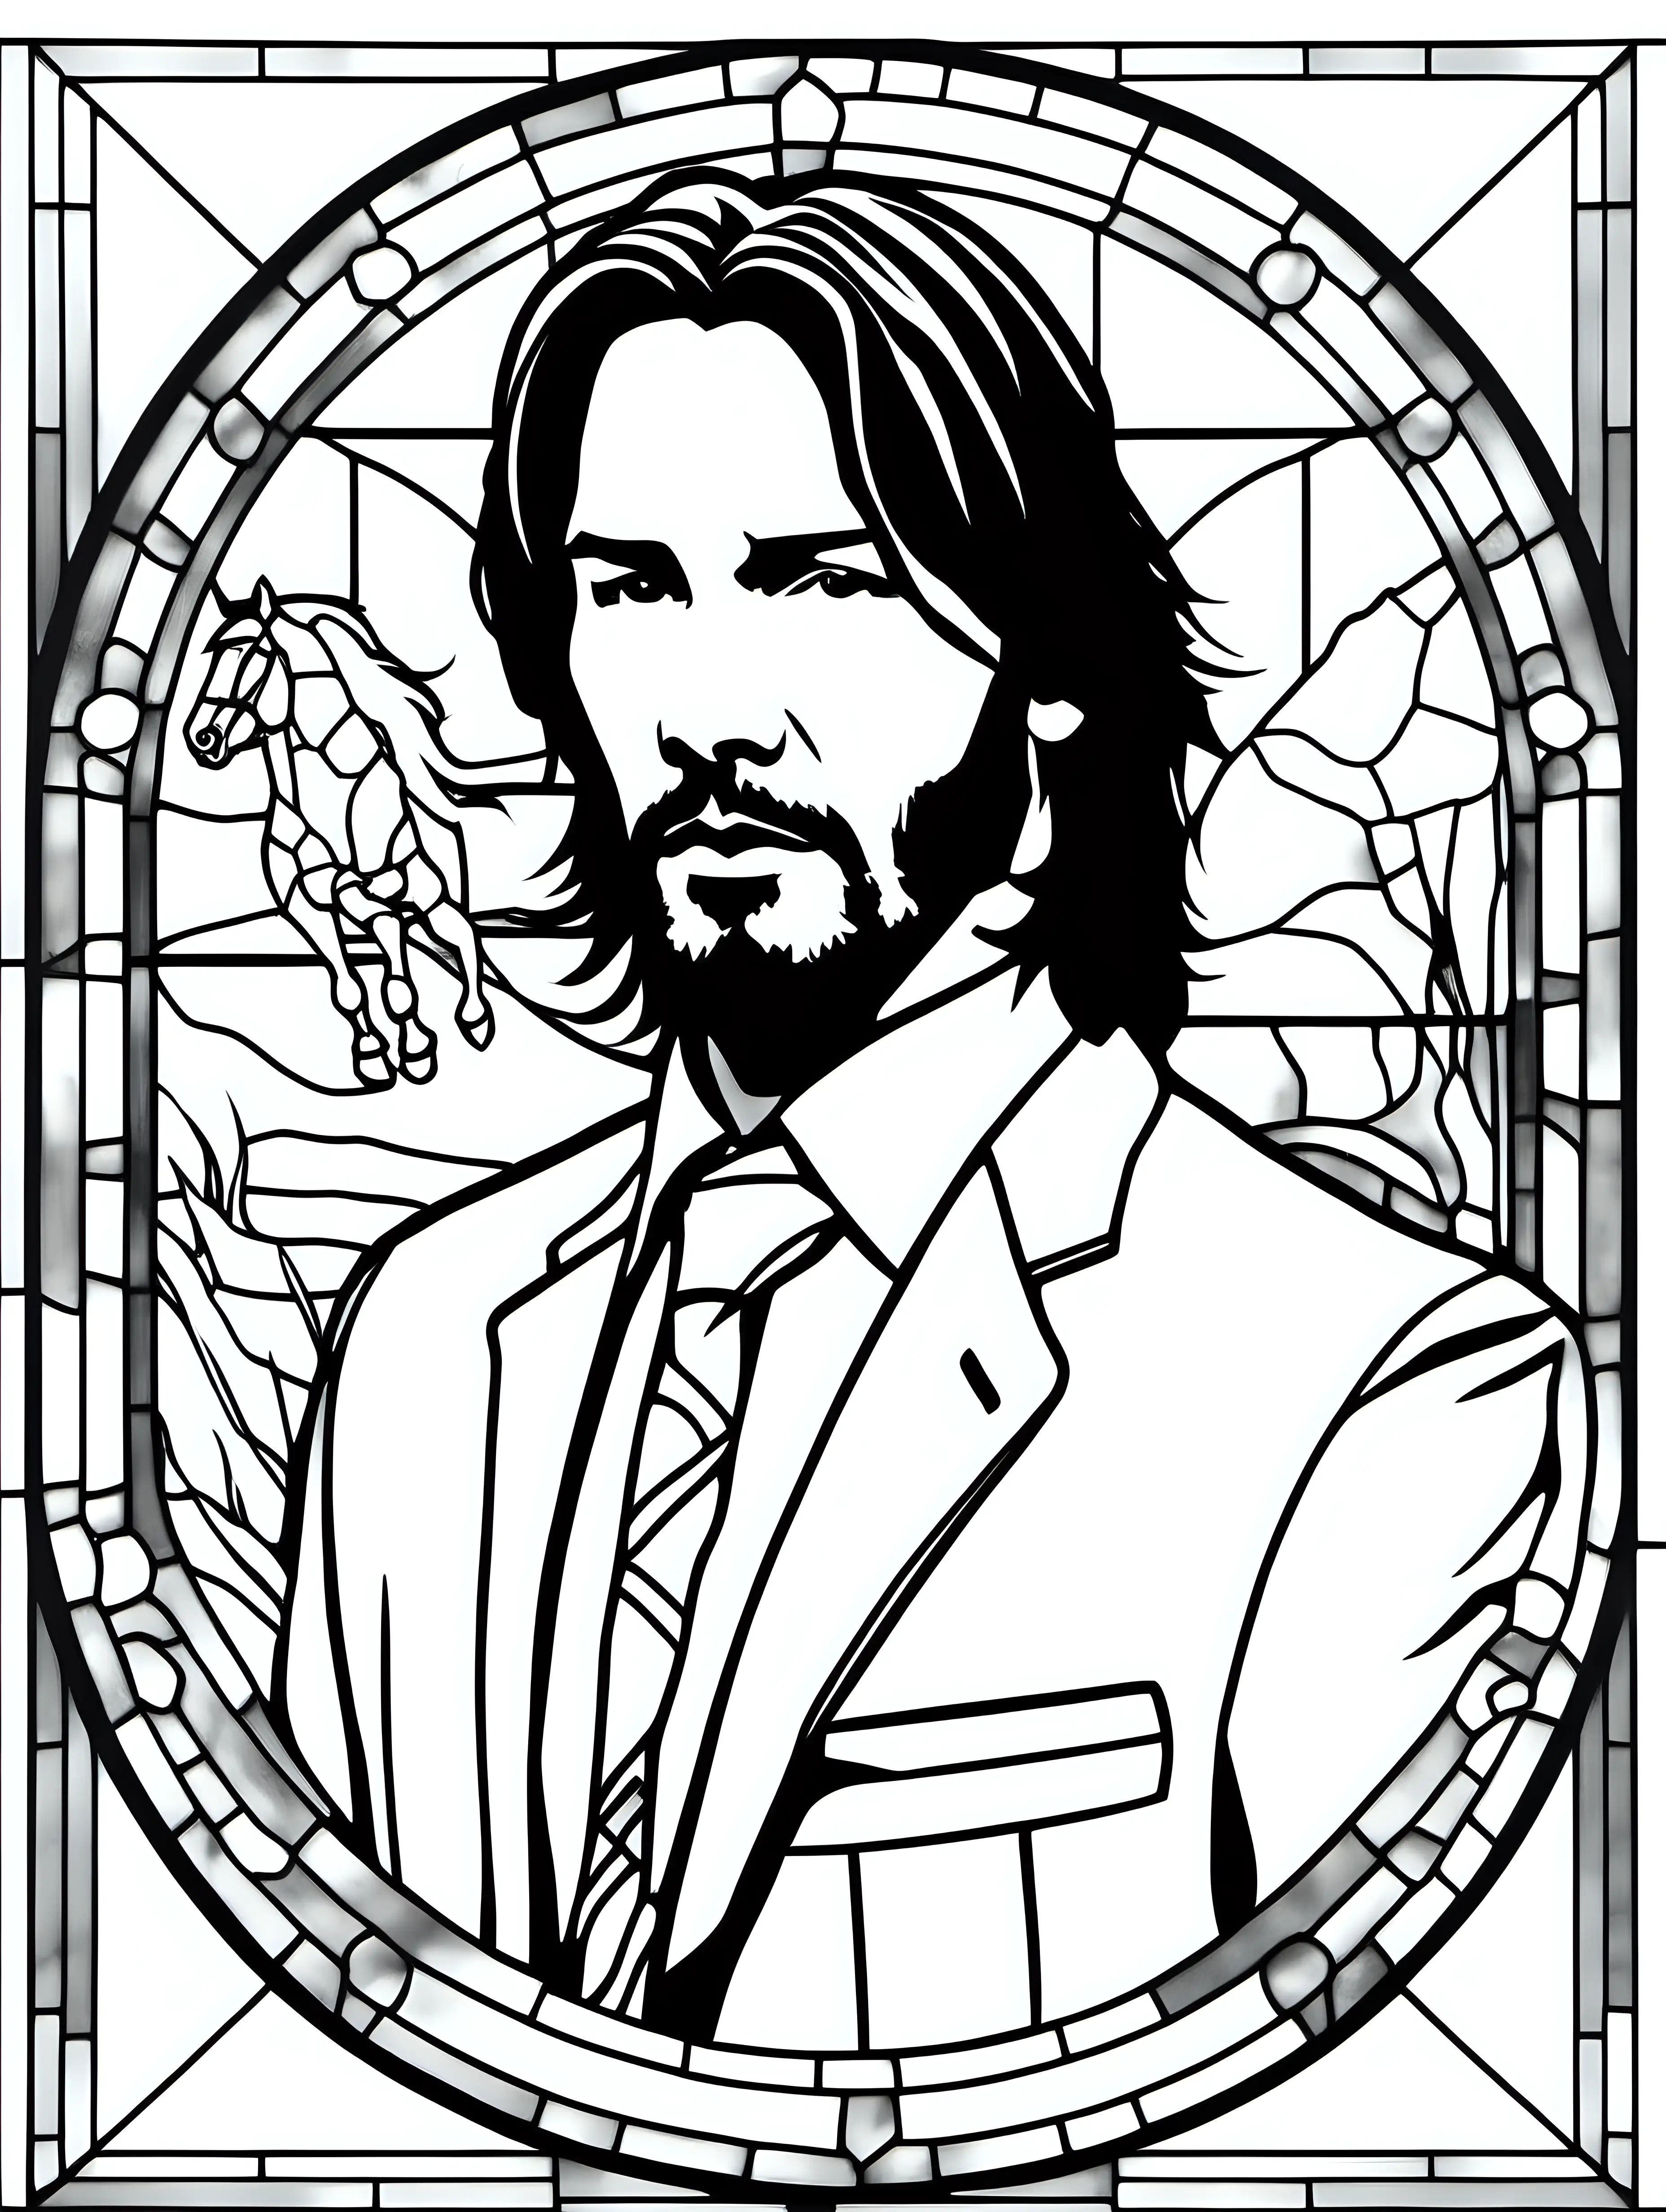 adult coloring page, clean black and white, white background, young Keanu Reeves, stained glass with a wild stallion theme